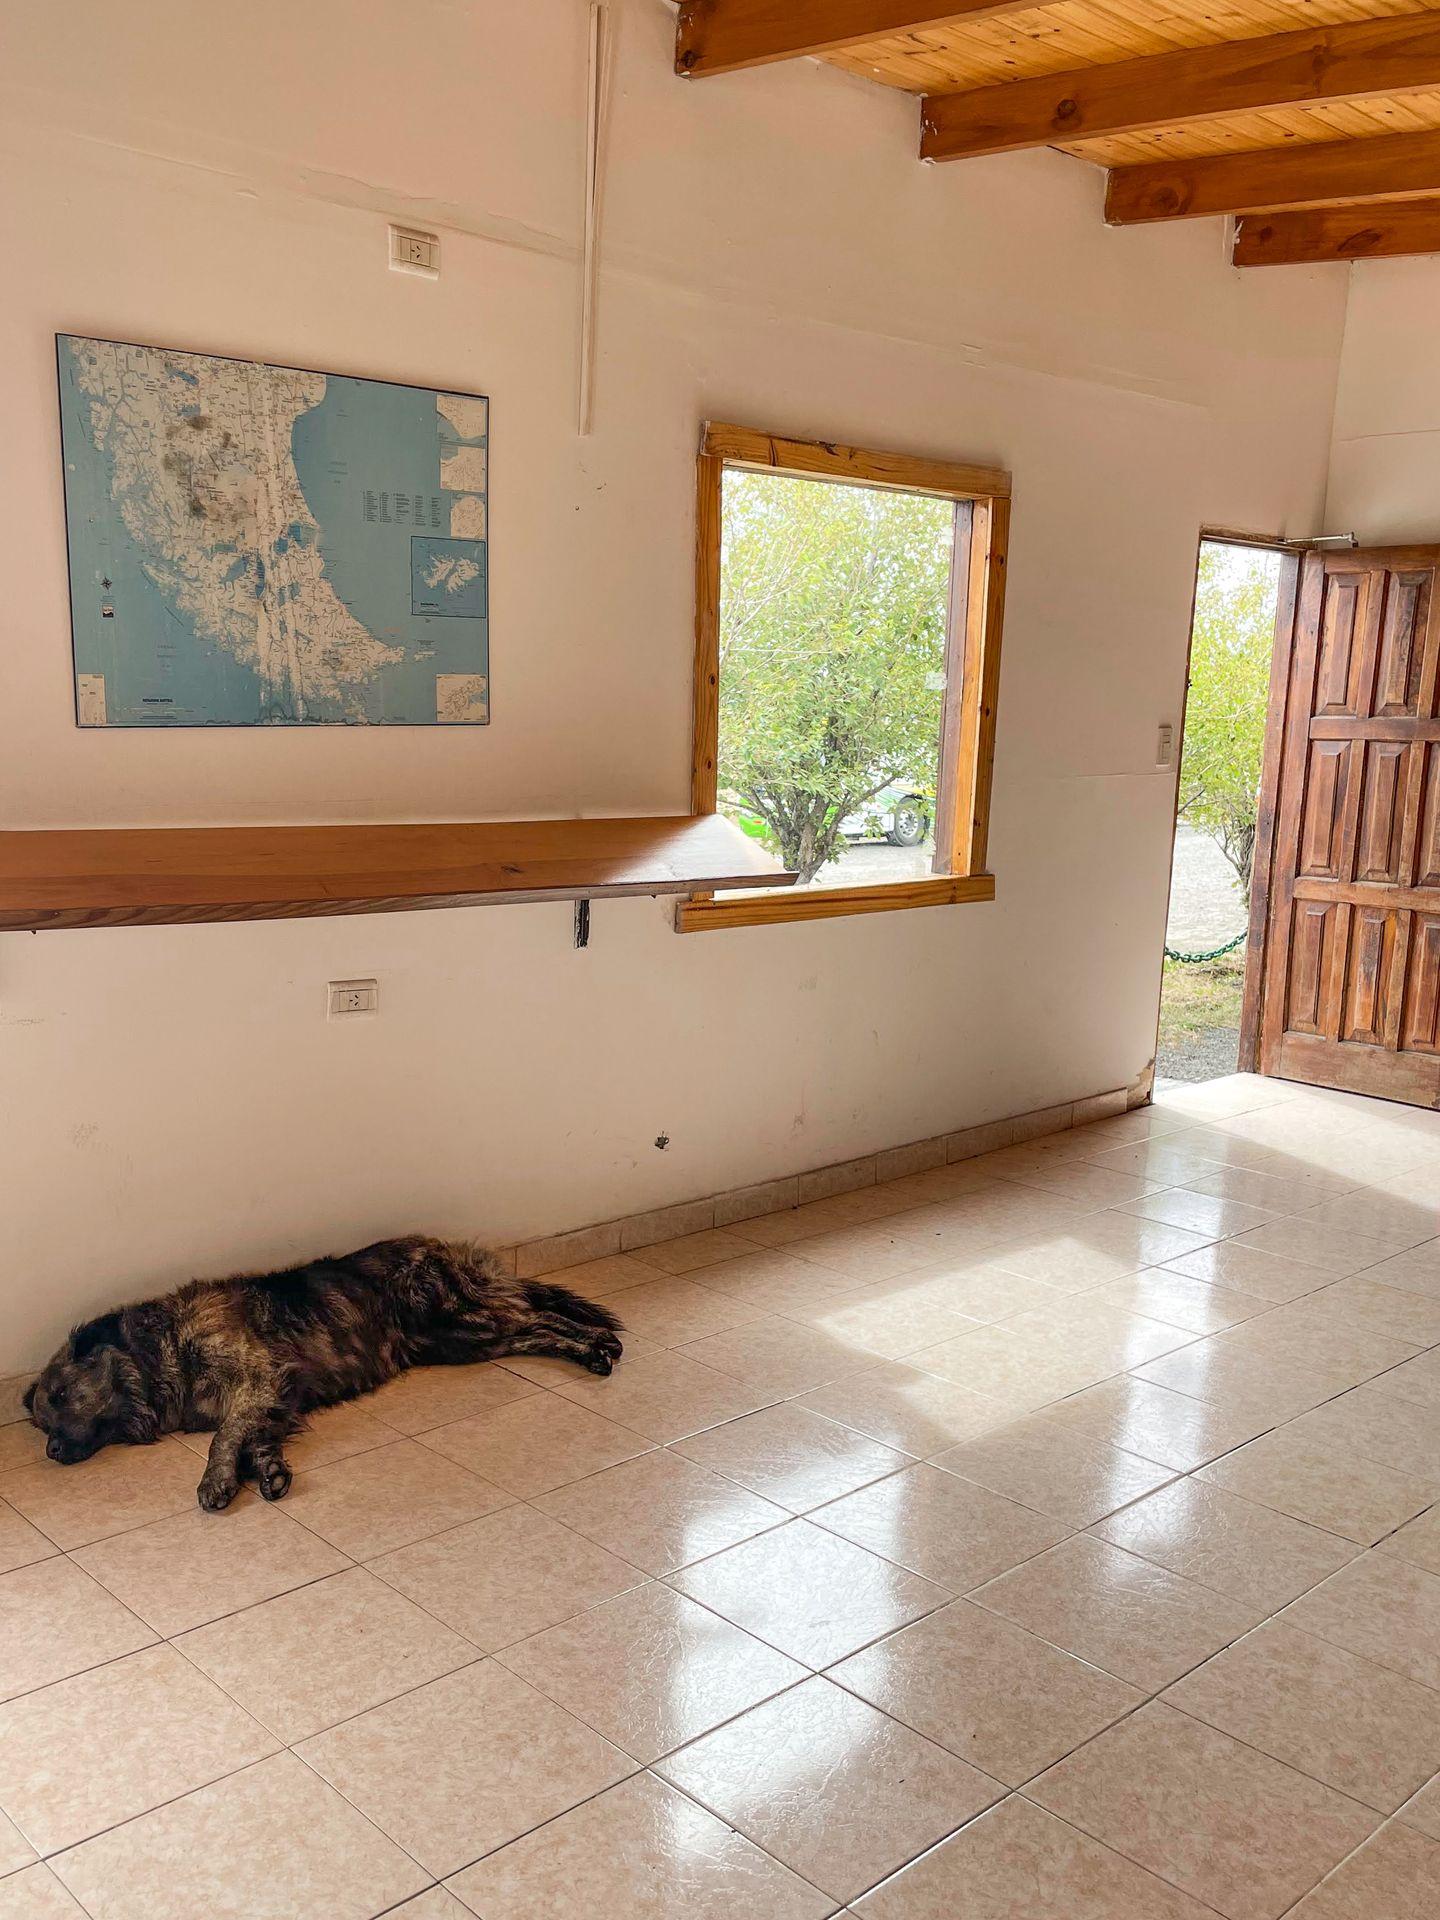 A dog laying inside of the building at the Argentina border crossing.